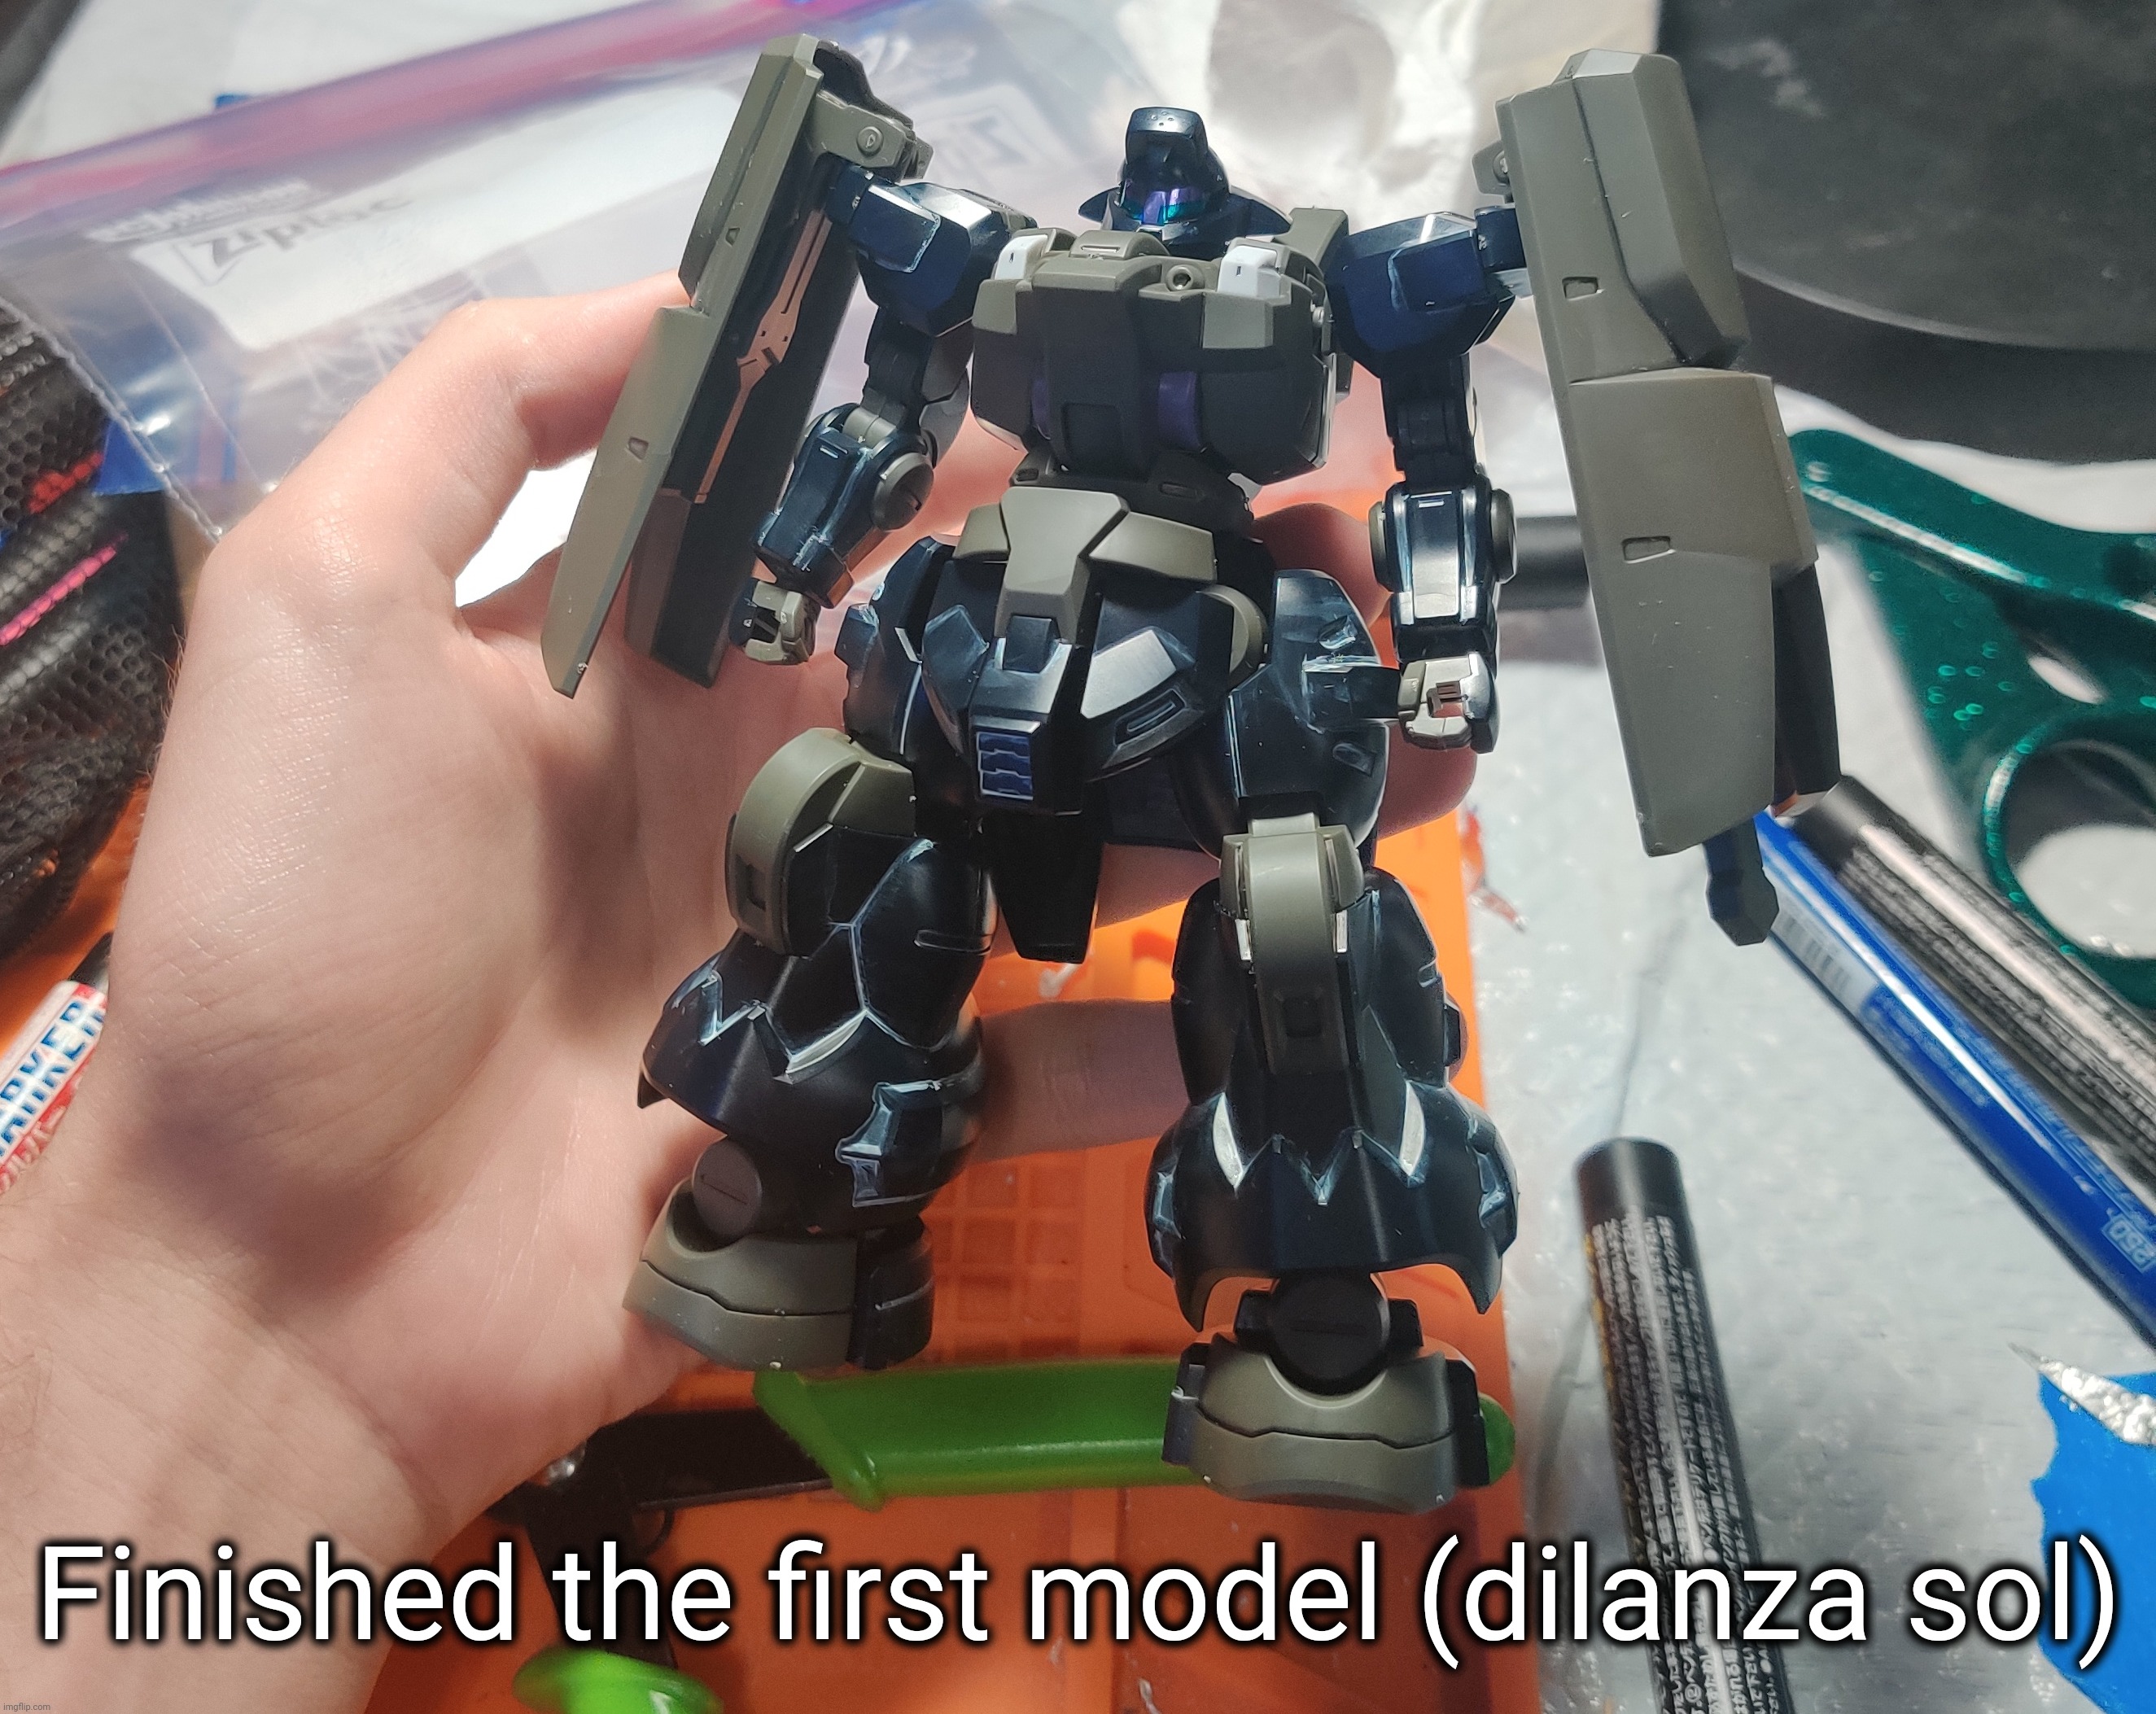 Finished the first model (dilanza sol) | made w/ Imgflip meme maker